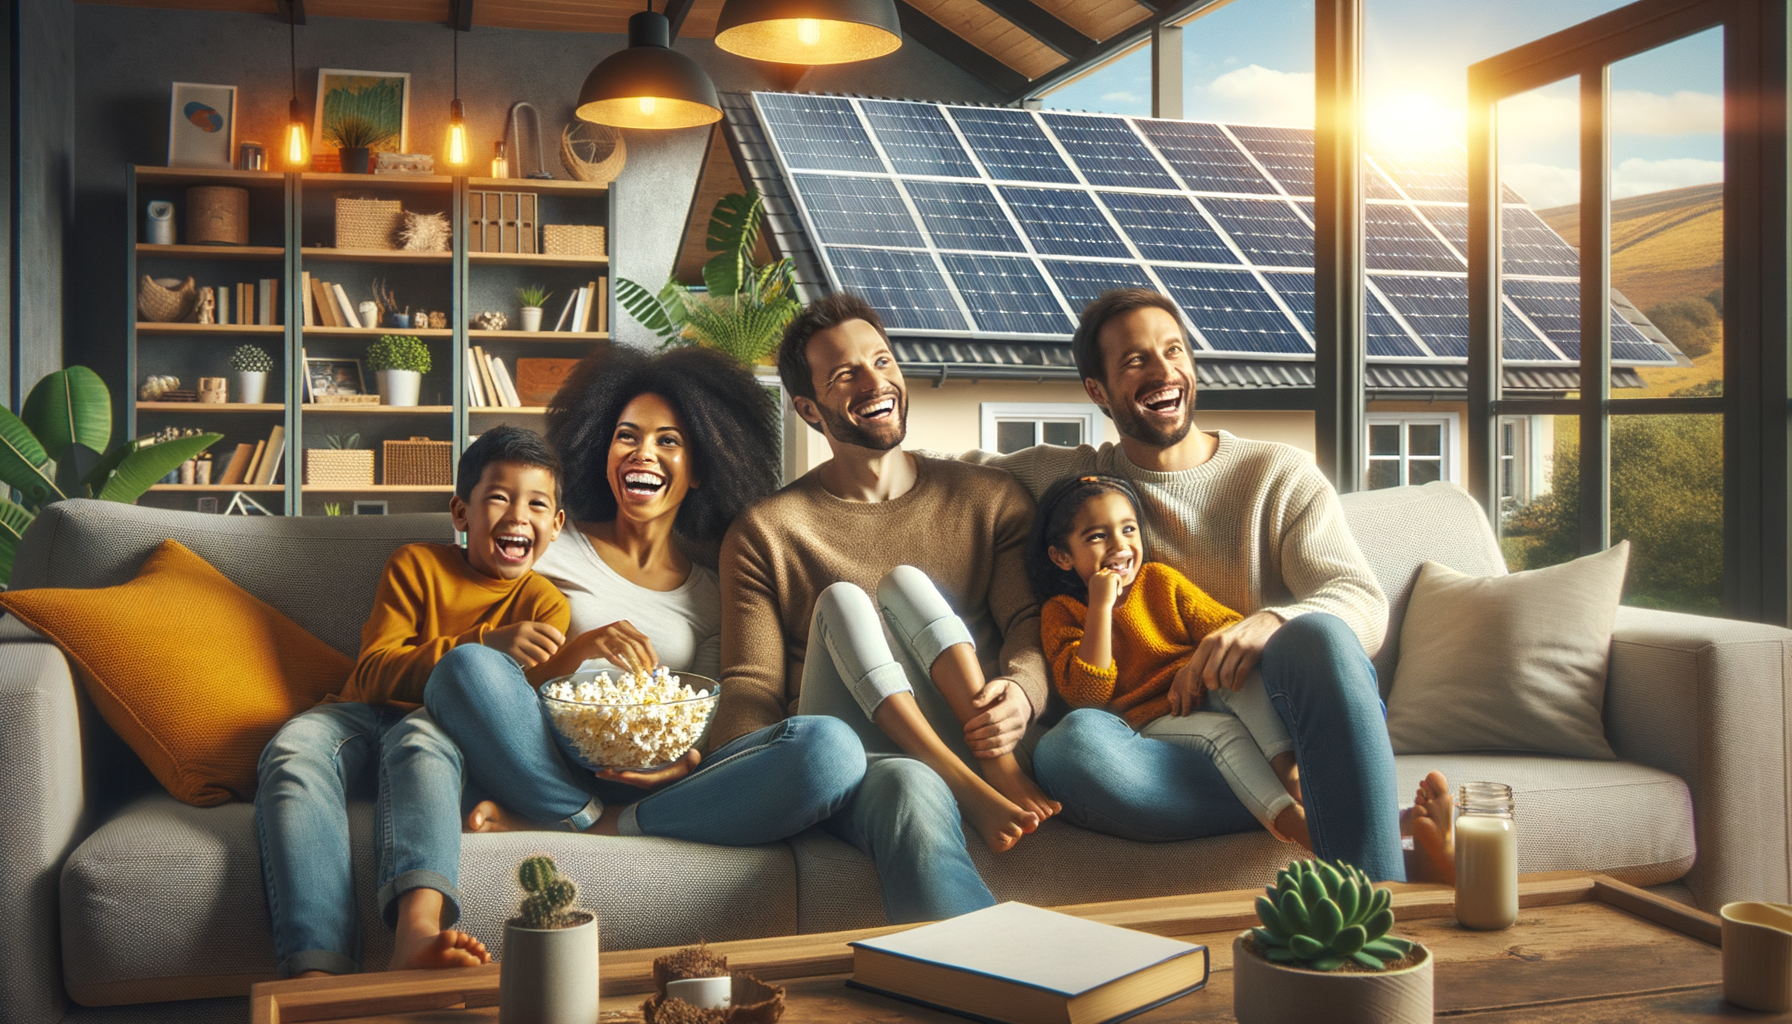 ALT: Happy family in a solar-powered home